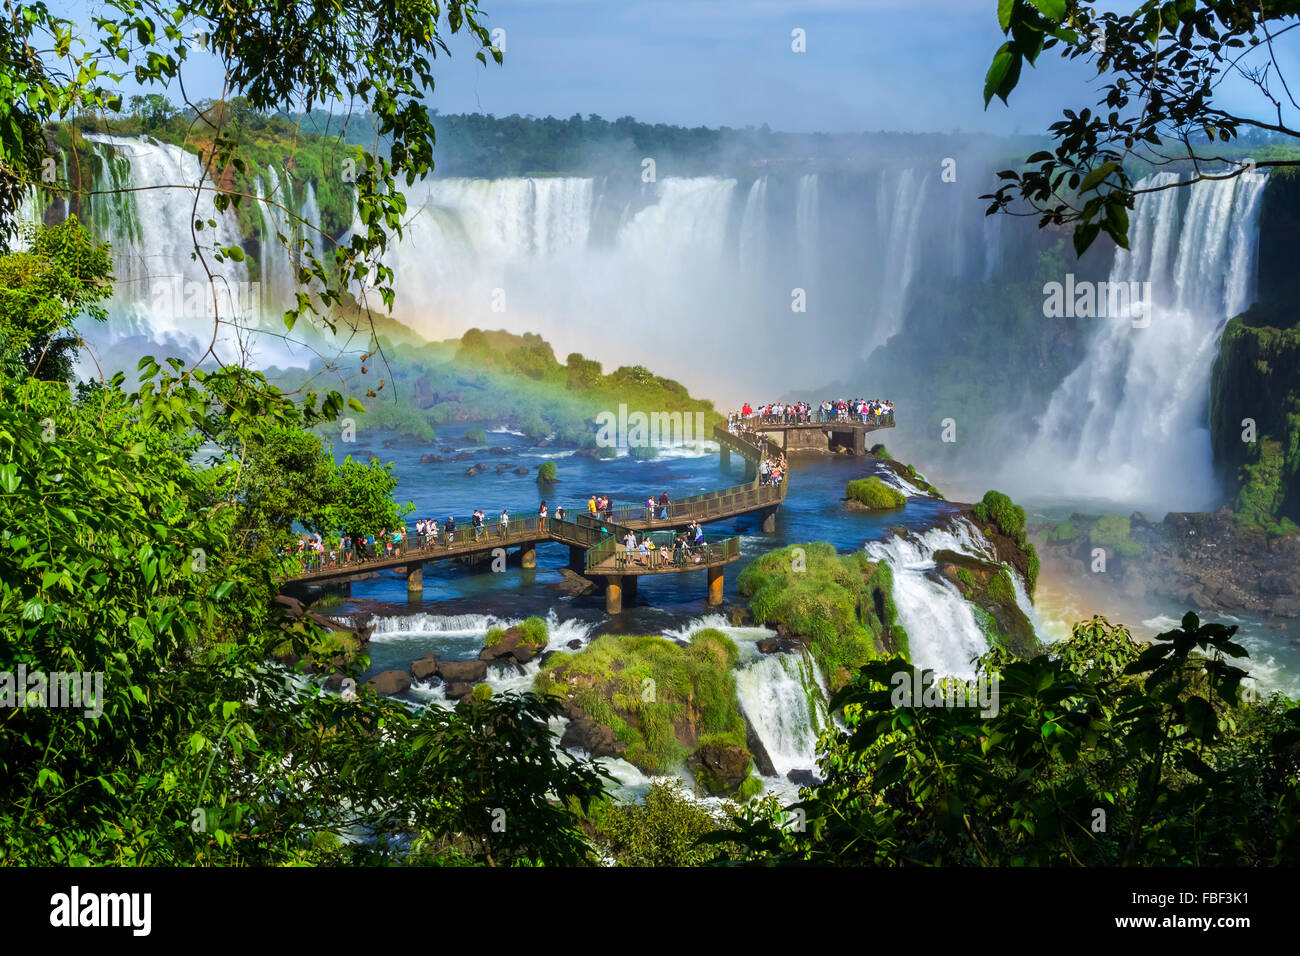 Tourists at Iguazu Falls, one of the world's great natural wonders, on the border of Argentina and Brazil. Stock Photo